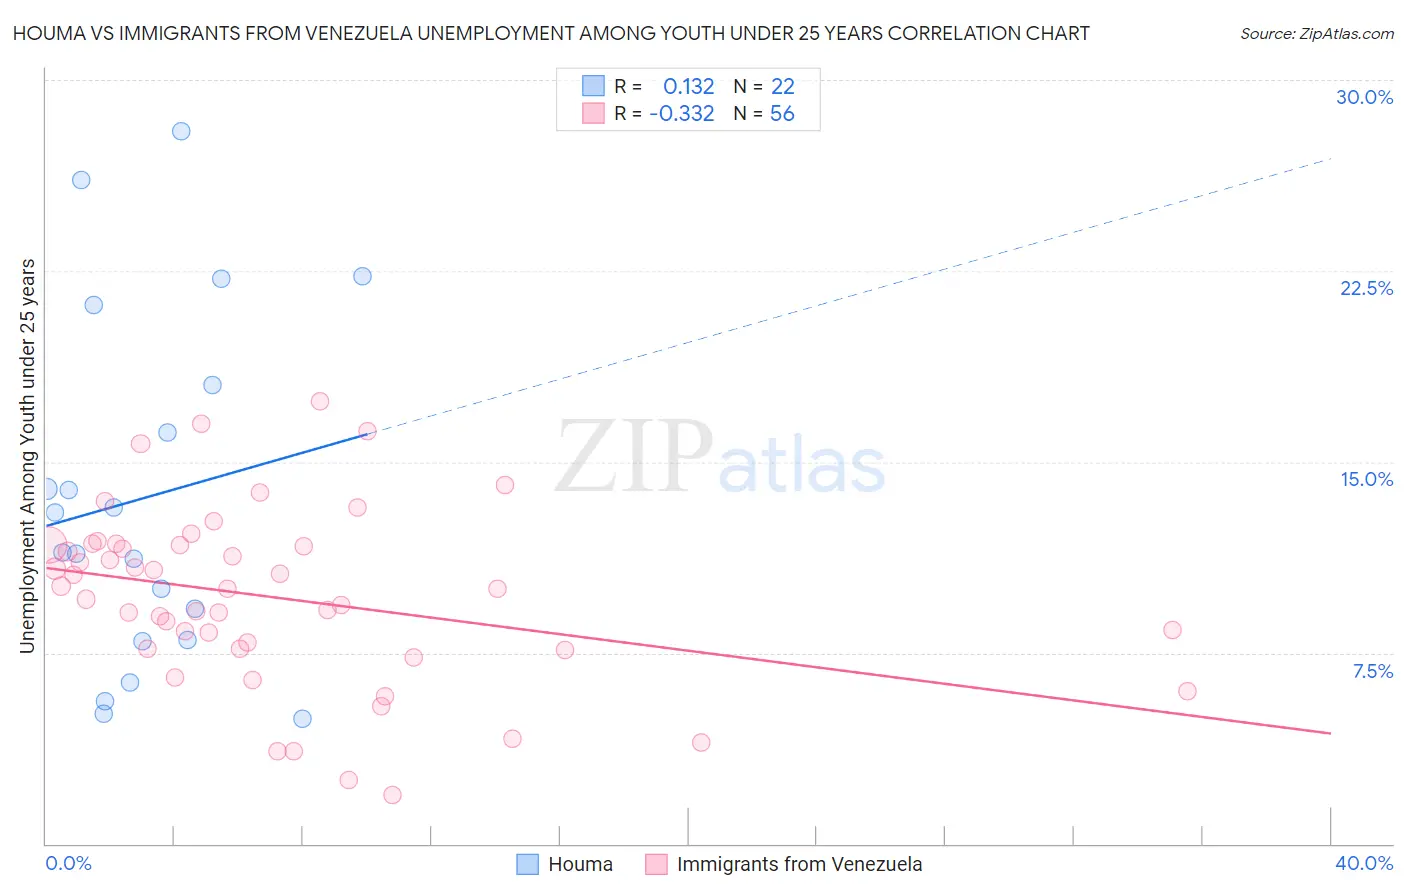 Houma vs Immigrants from Venezuela Unemployment Among Youth under 25 years